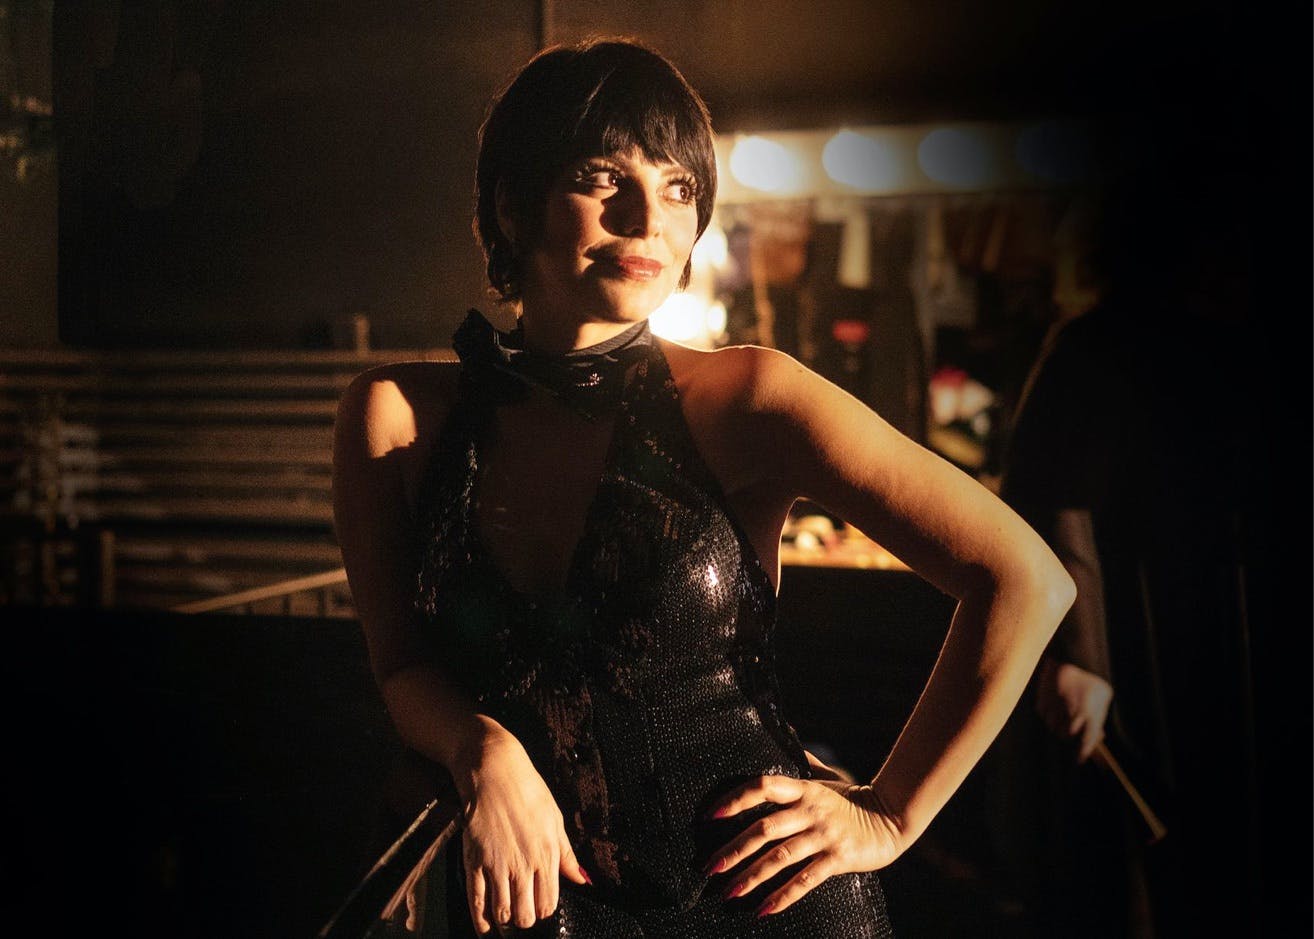 Krysta Rodriquez stands with her hand on her waist. The shot is mostly black, with light on her arm, face, and background. She wears a black sequiny dress and smiles at something in the distance.